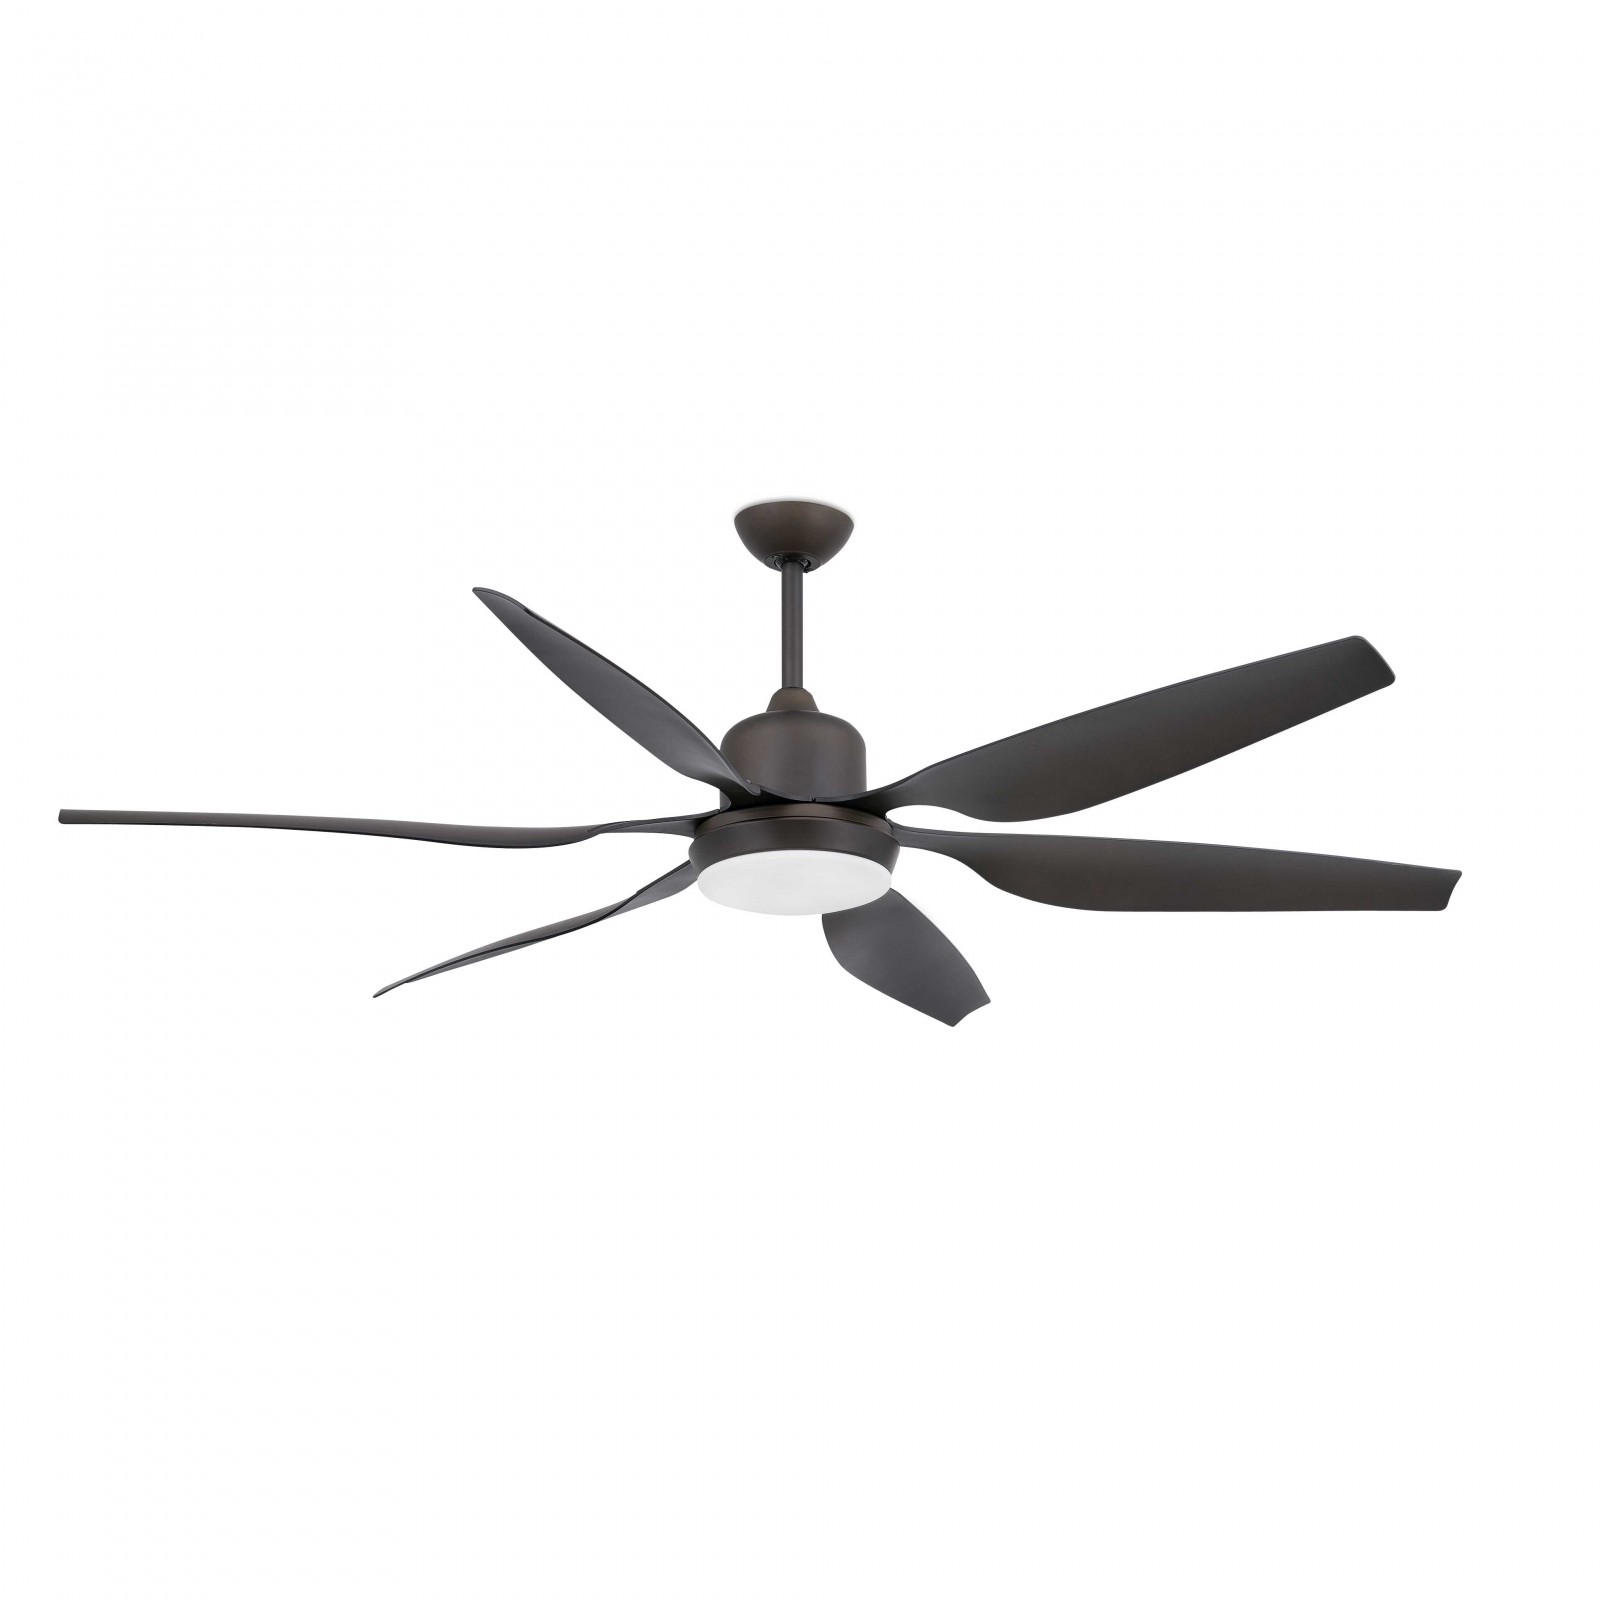 Energy Saving Ceiling Fan Faro Tilos 168 5cm 66 With Light And Remote